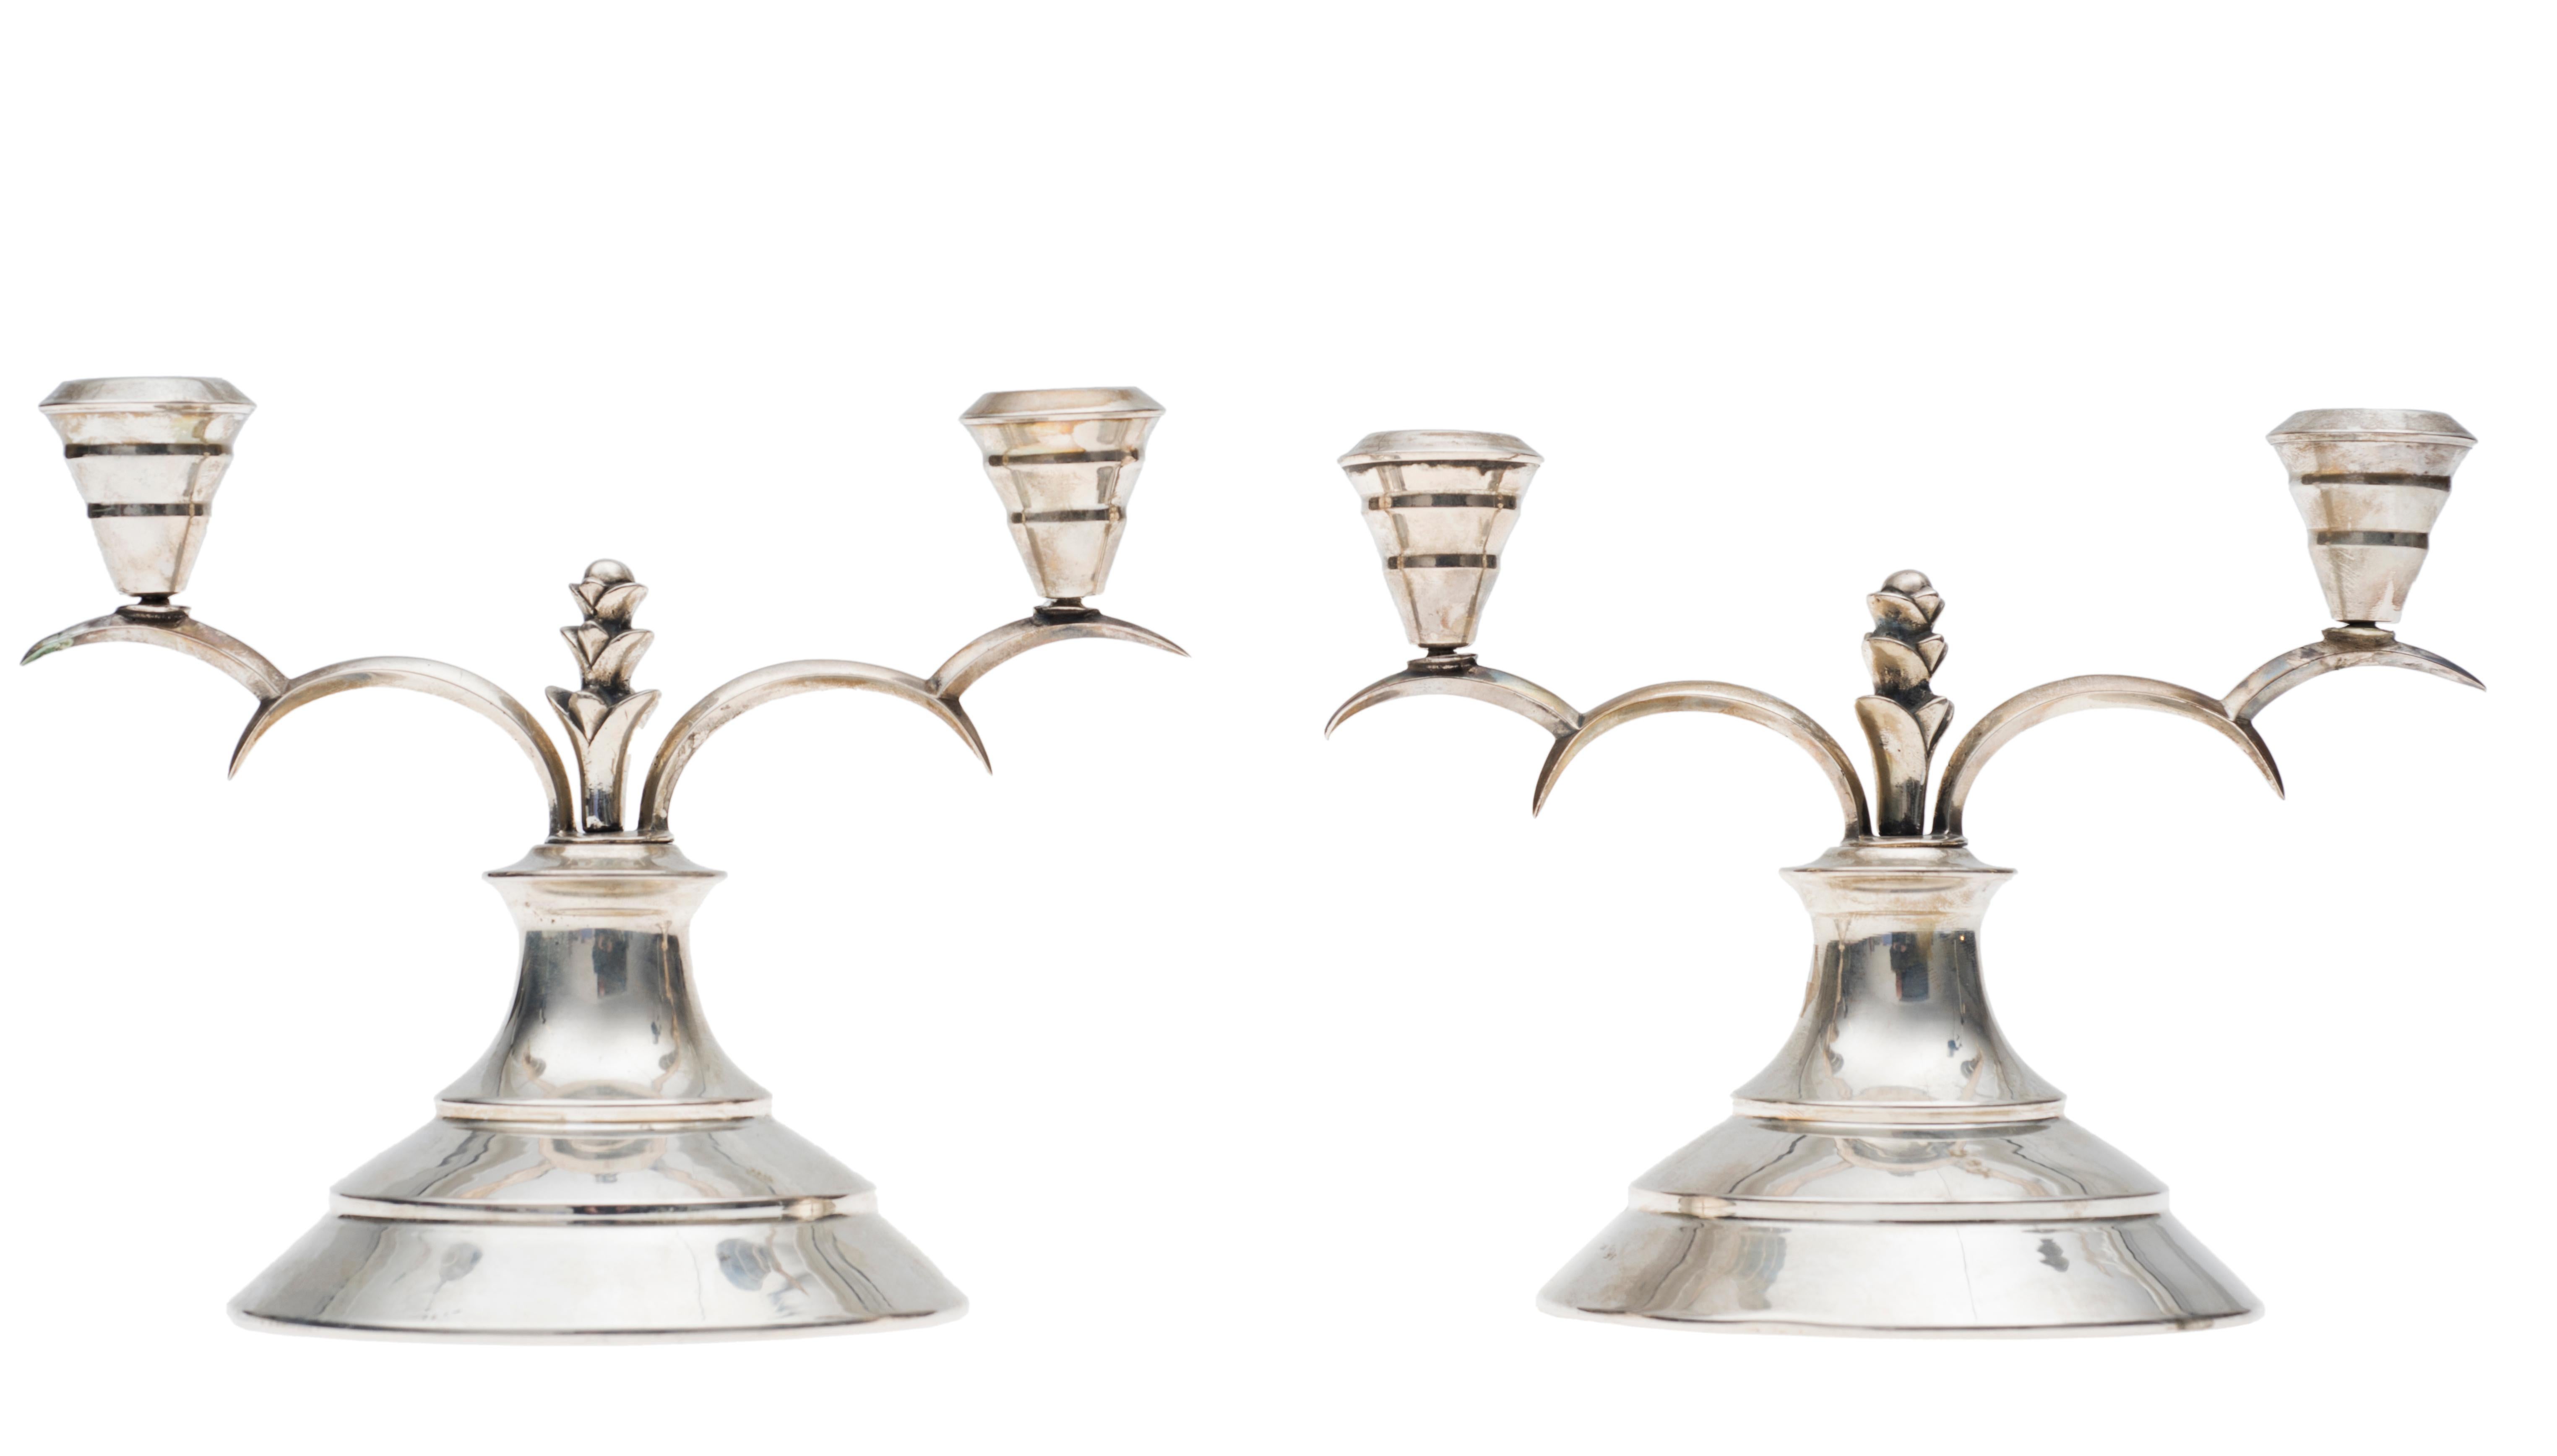 Vintage Pair of Decorative Candleholders, Italian Manufacture, Early 1900 For Sale 1